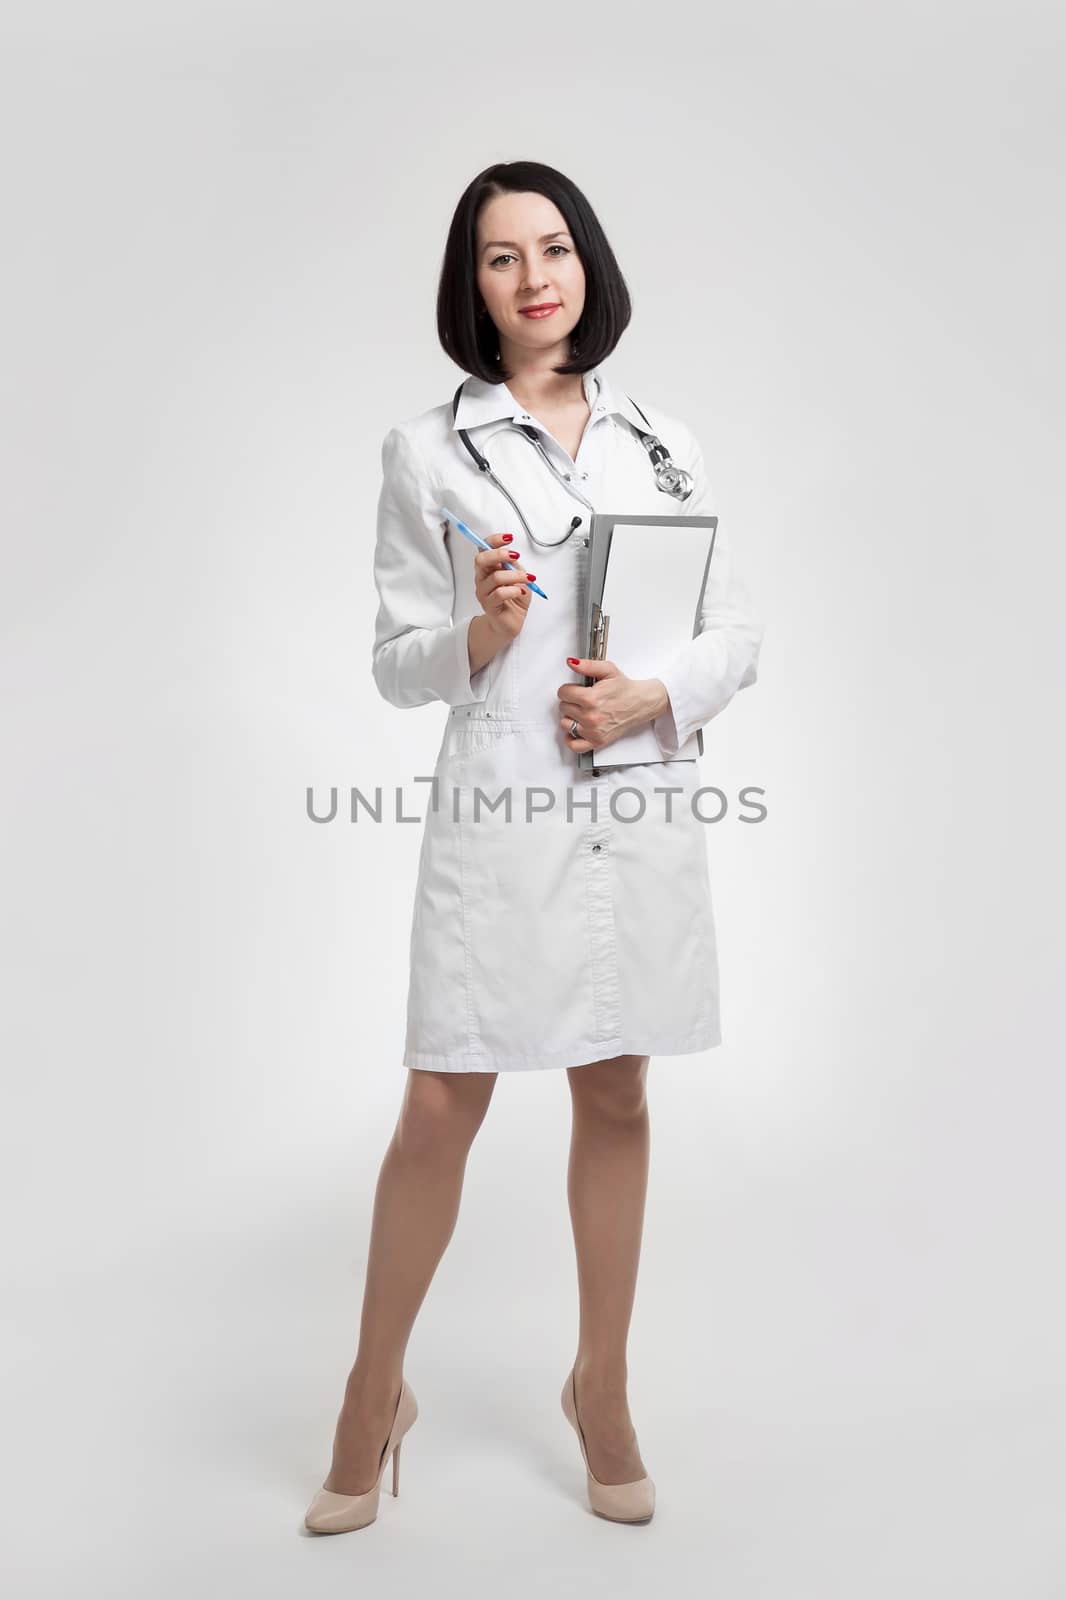 the young beautiful woman the doctor on a white background